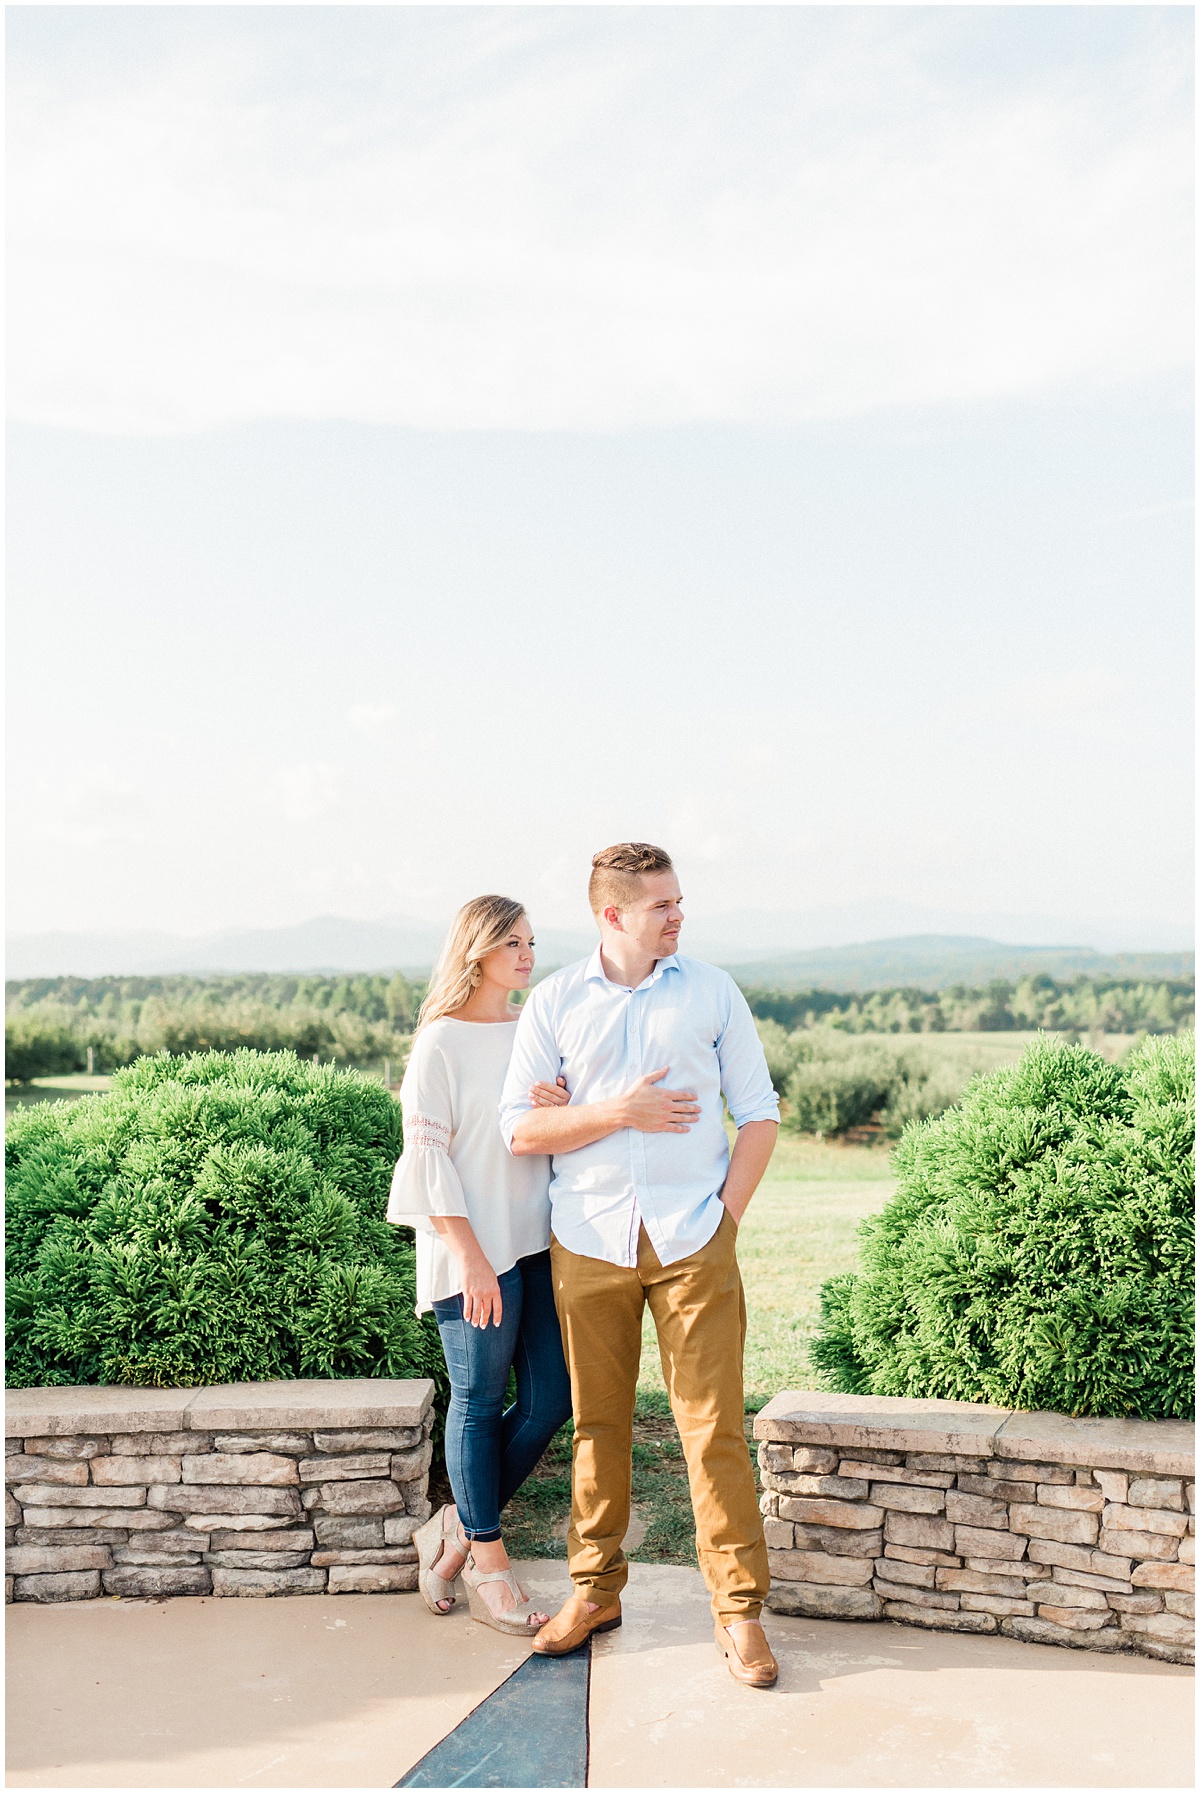 Chattooga Belle Farm Engagement Session